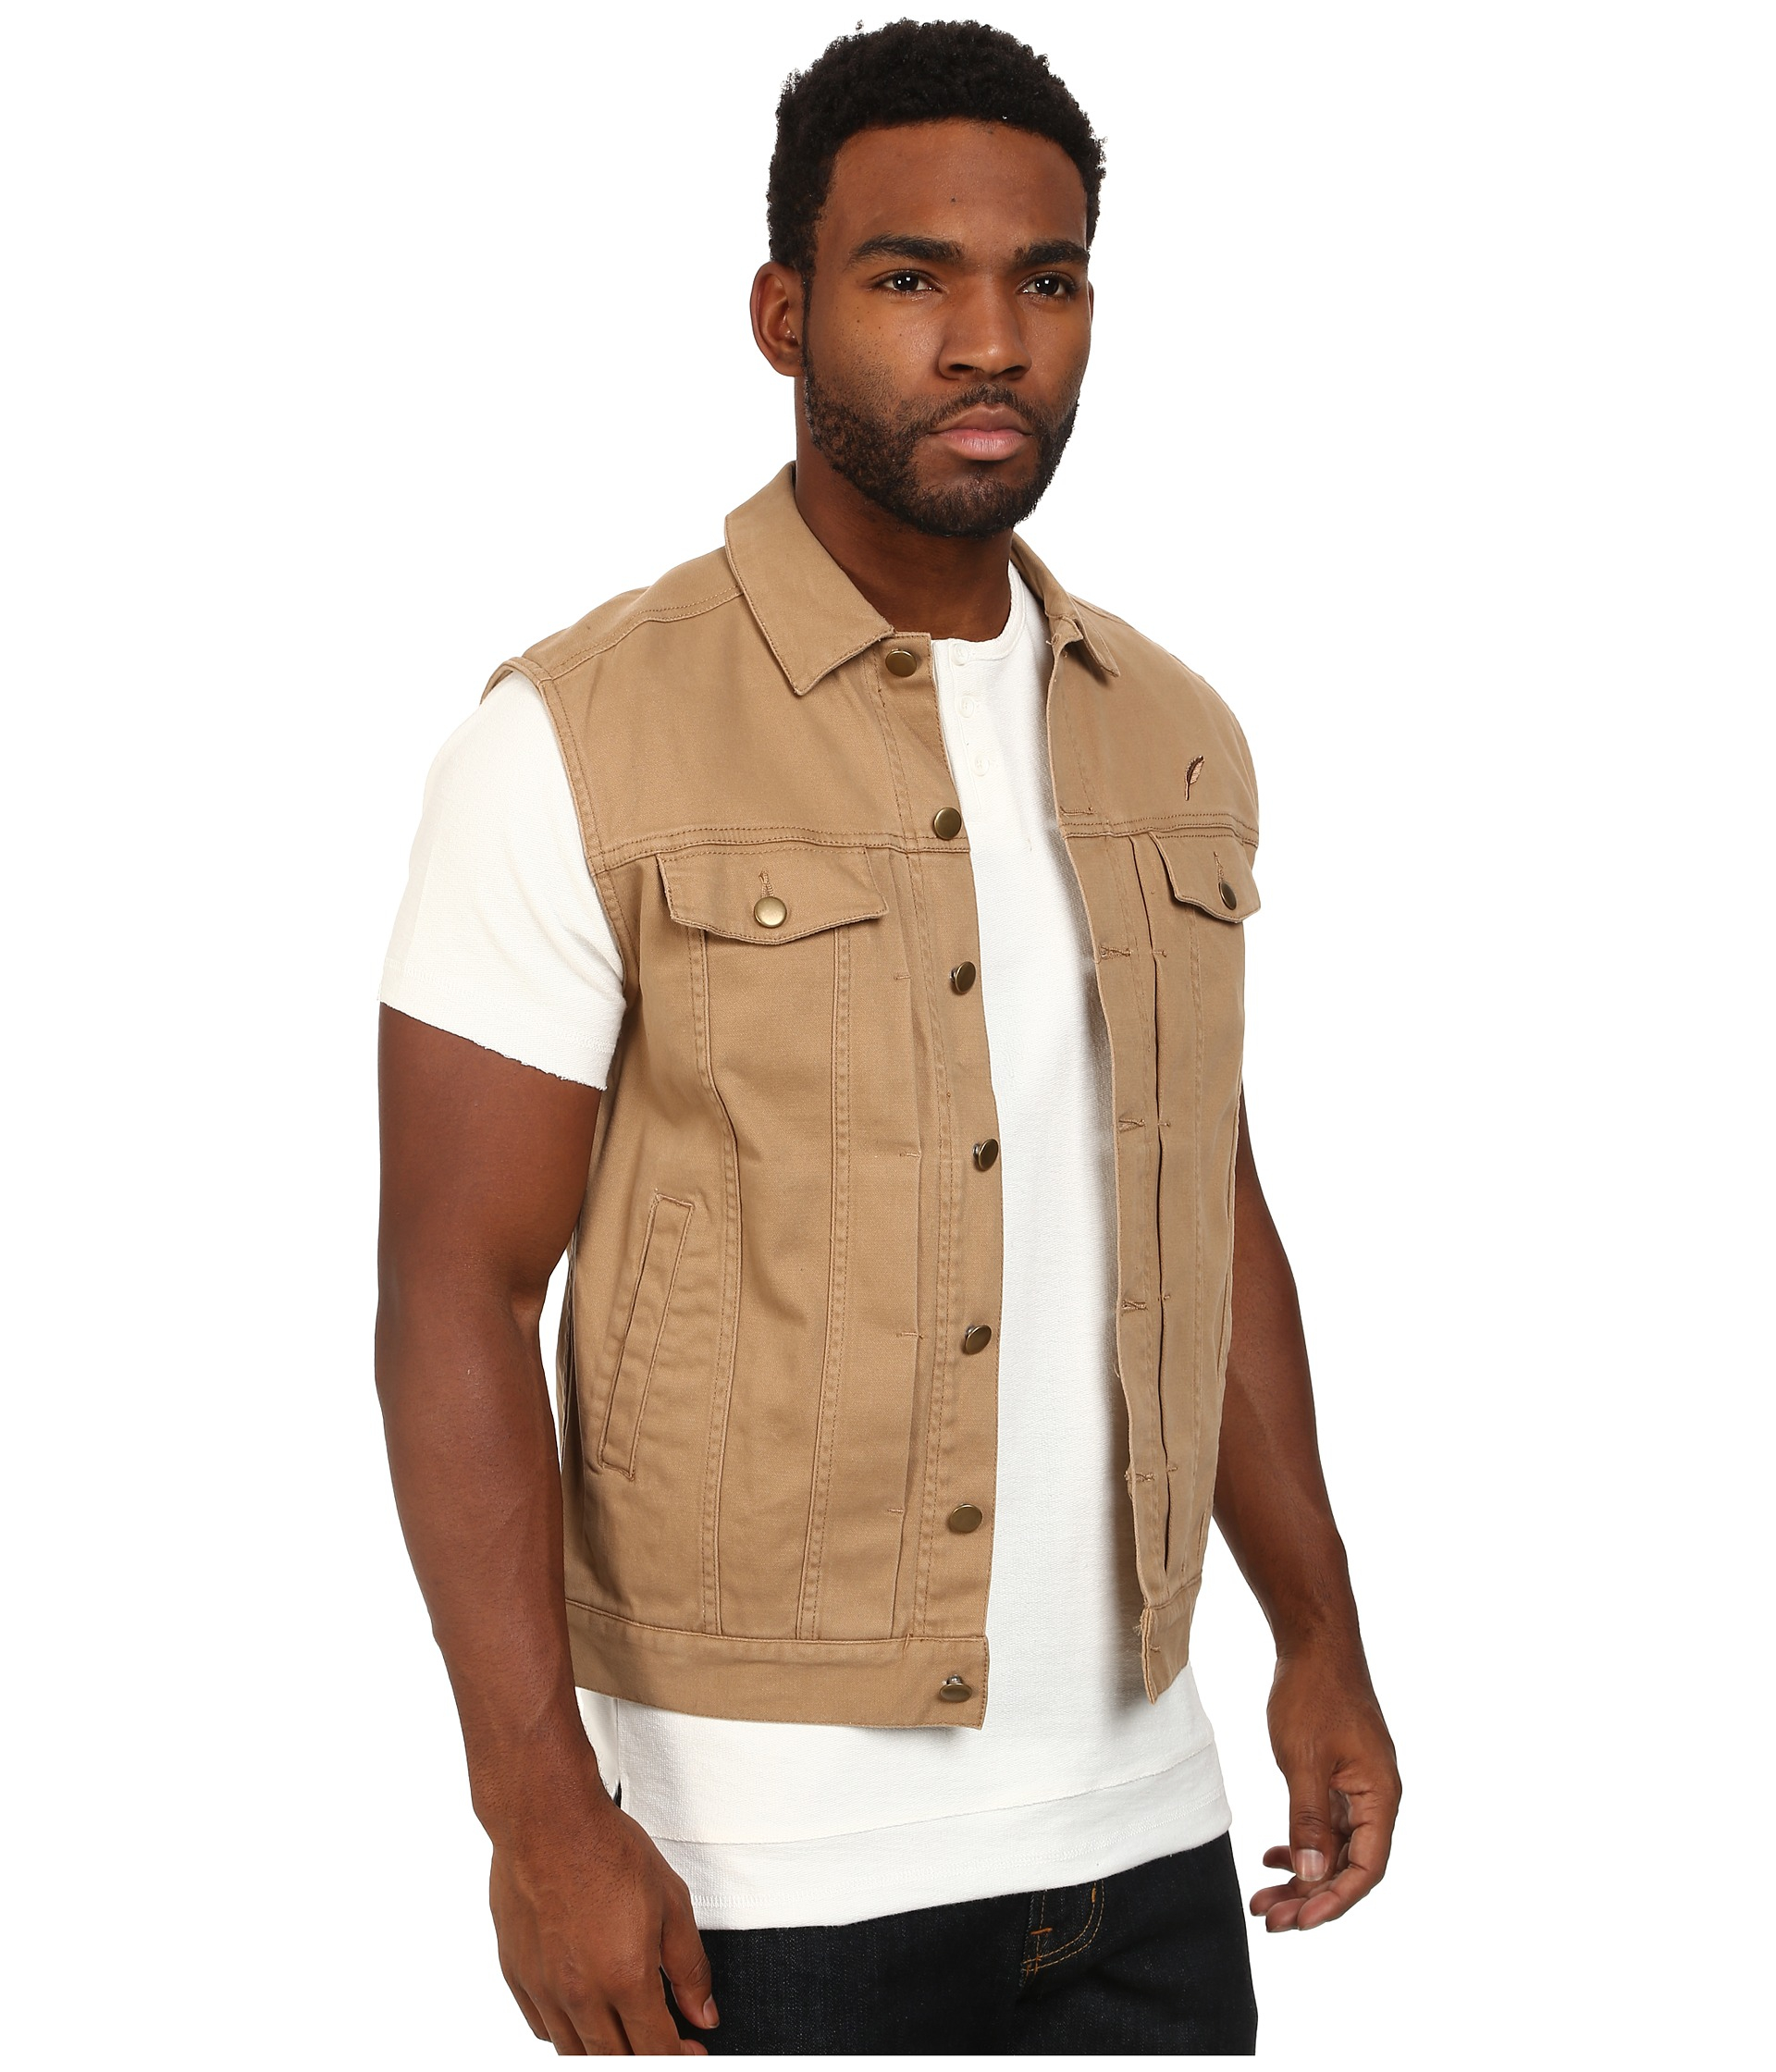 Timberland Hale Brushed Stretch Twill Denim Jacket Inspired Vest With  Stoned Wash in Tan (Brown) for Men - Lyst